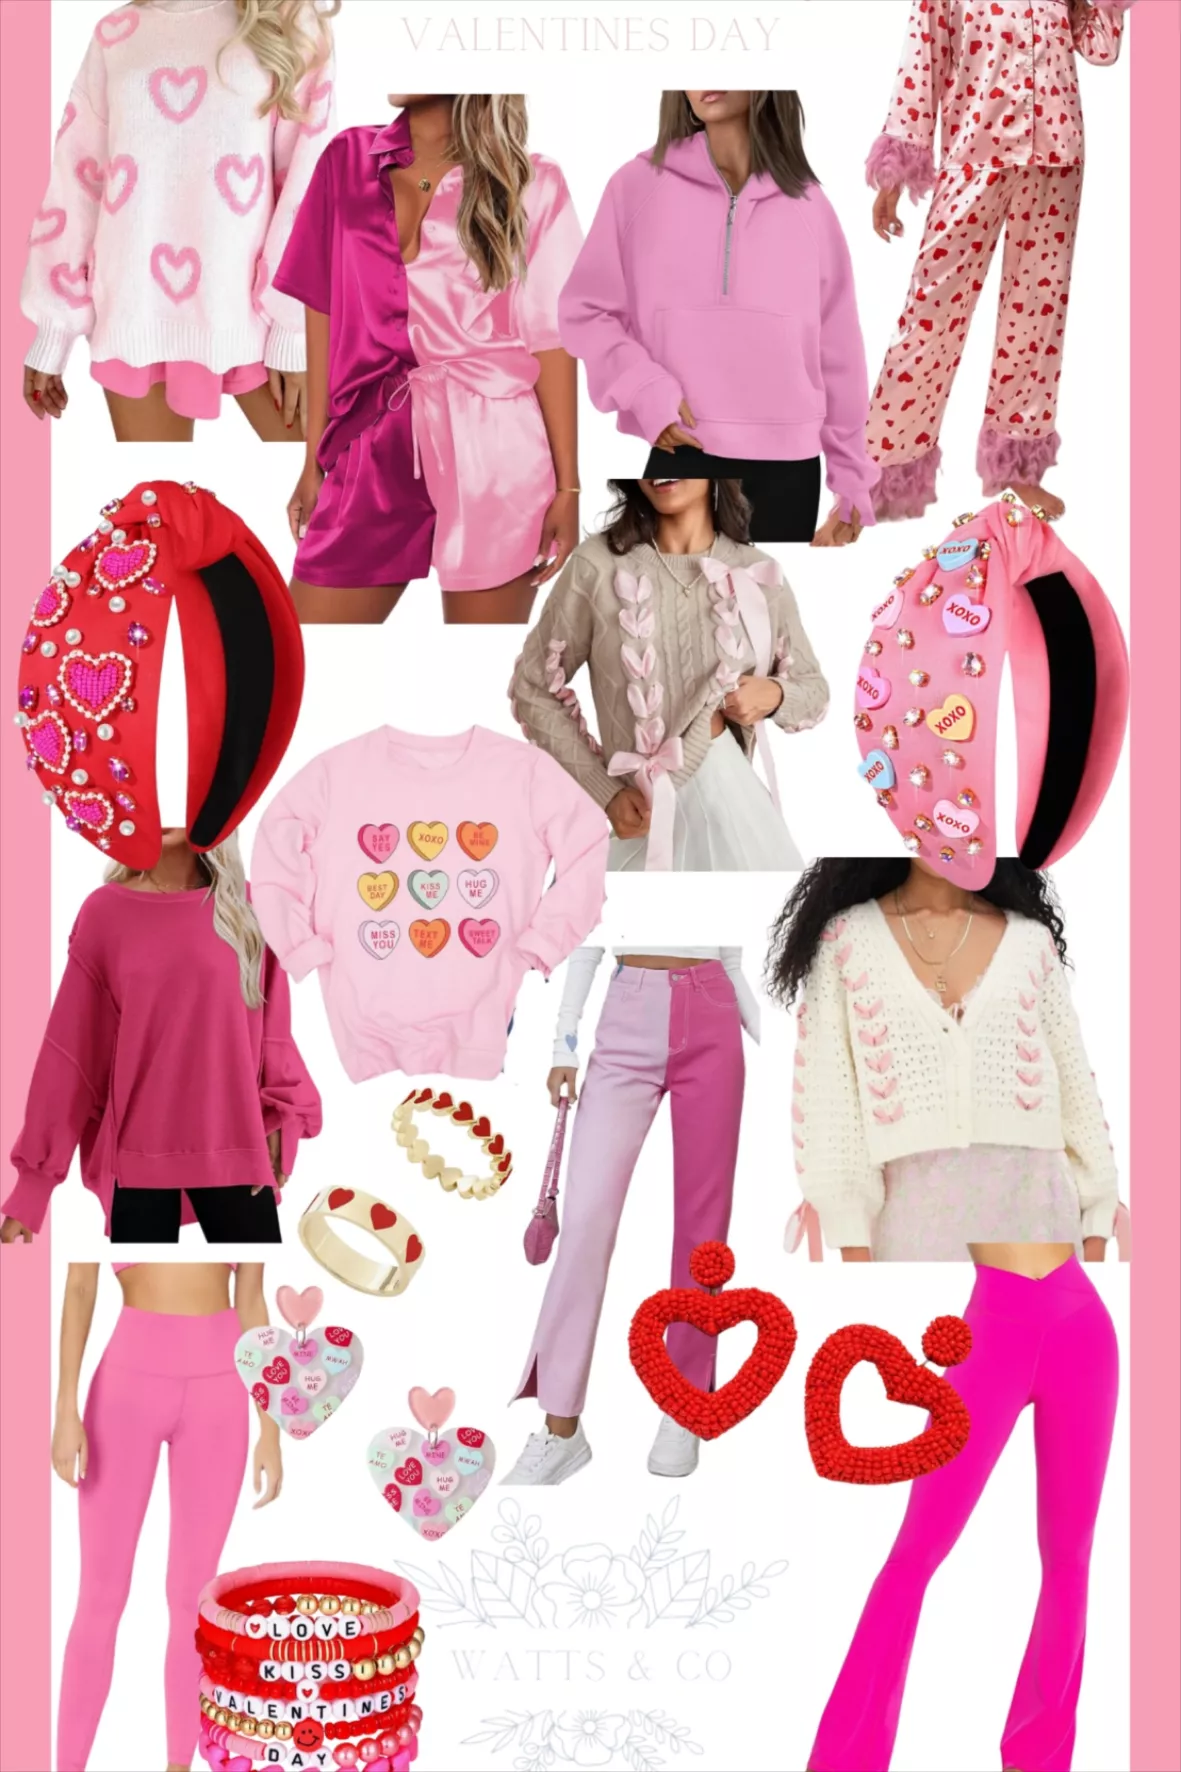 How to dress for the lovecore aesthetic  valentine's day outfit ideas 